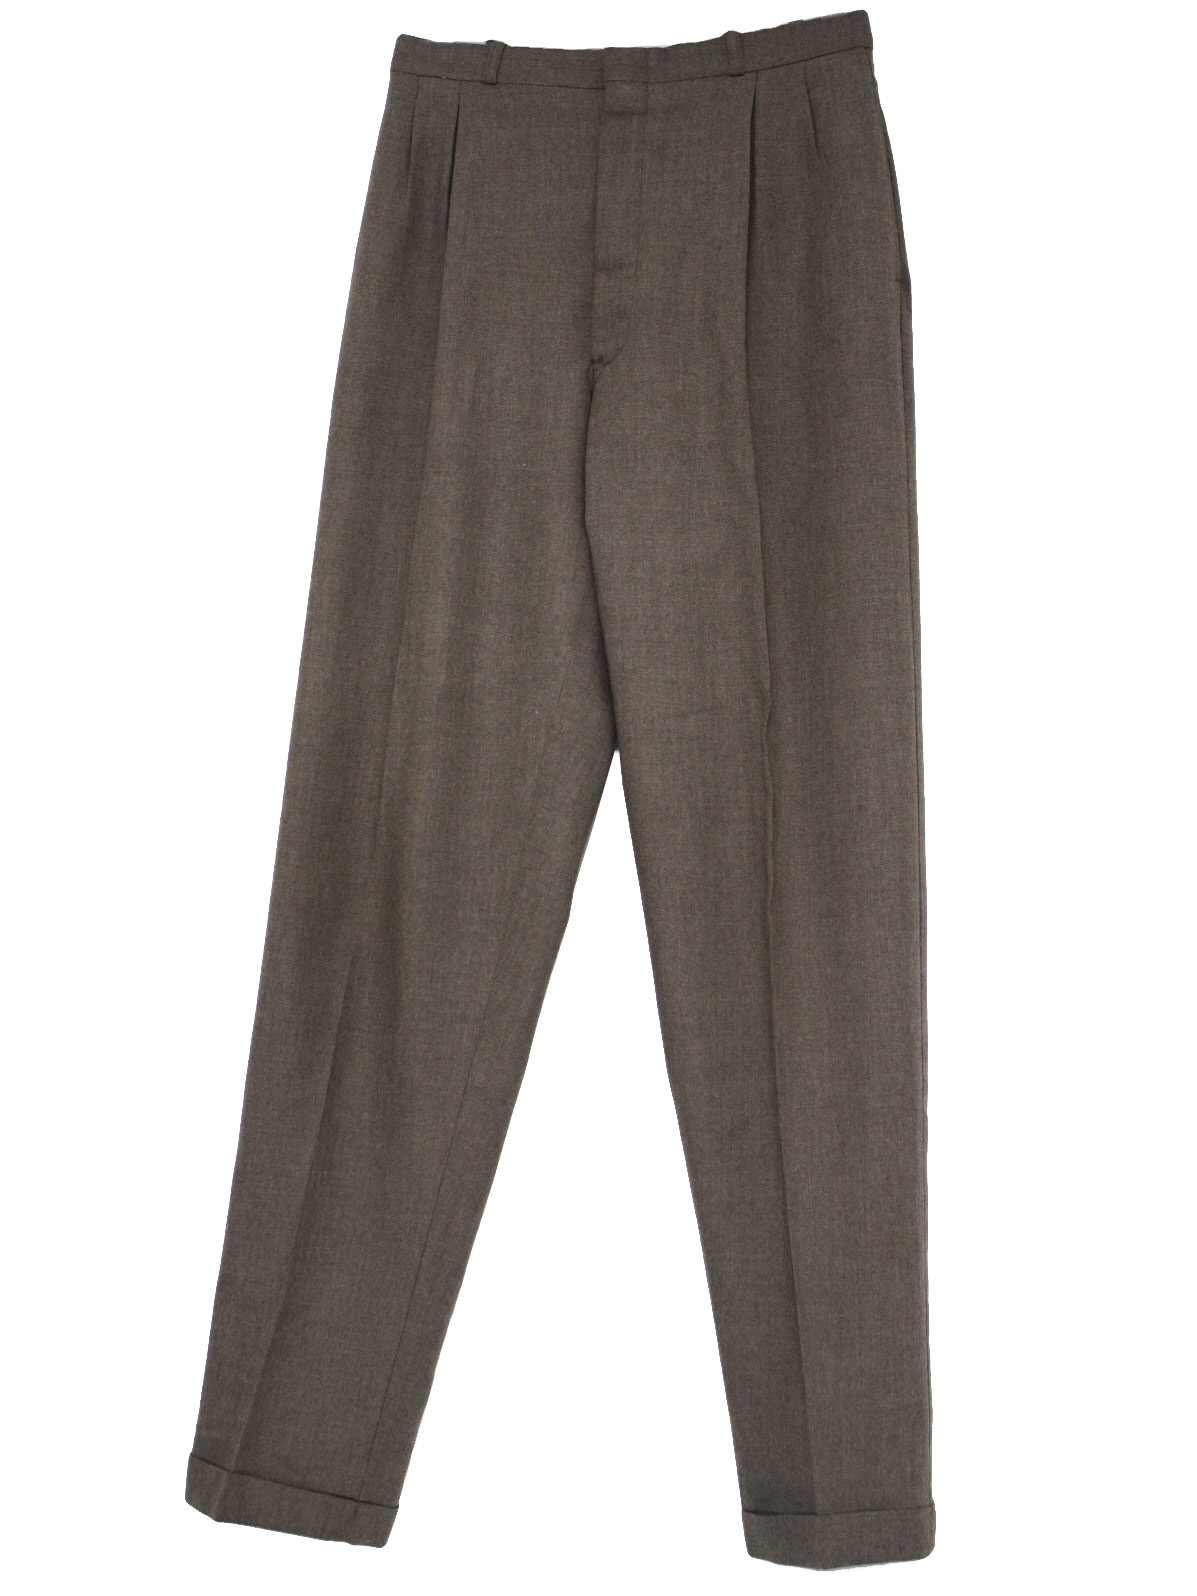 Cotler 80's Vintage Pants: 80s -Cotler- Mens heather taupe tan acrylic ...